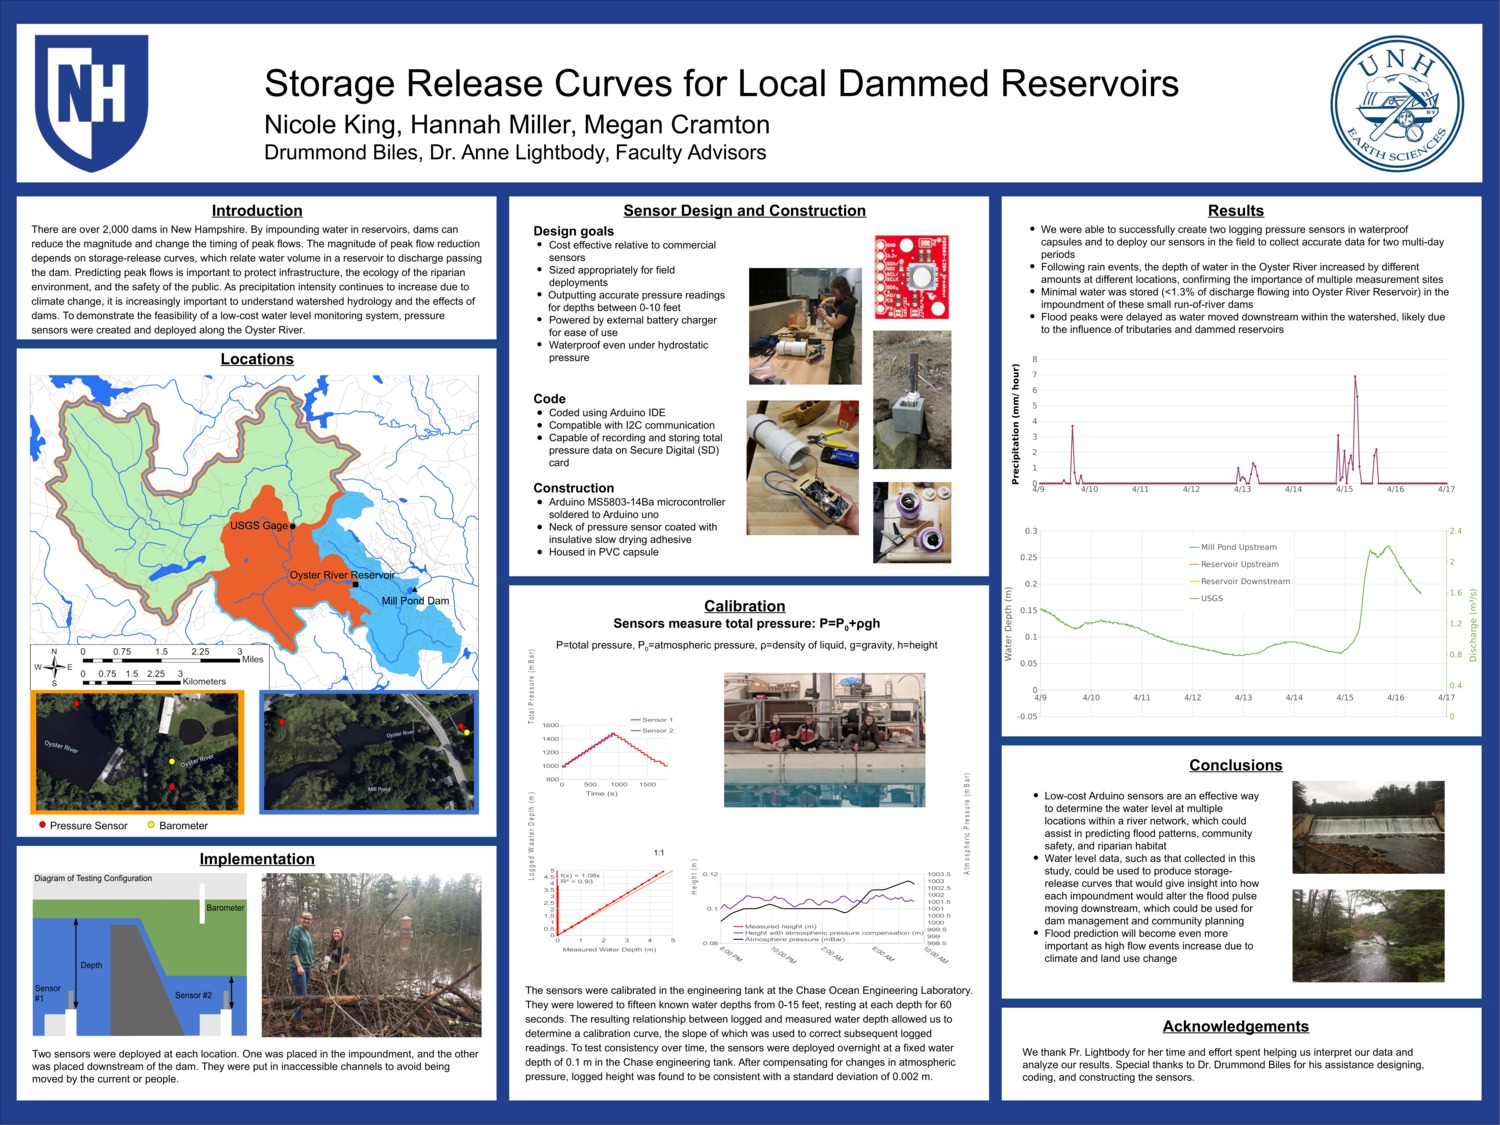 Storage Release Curves For Local Dammed Reservoirs by NKing18